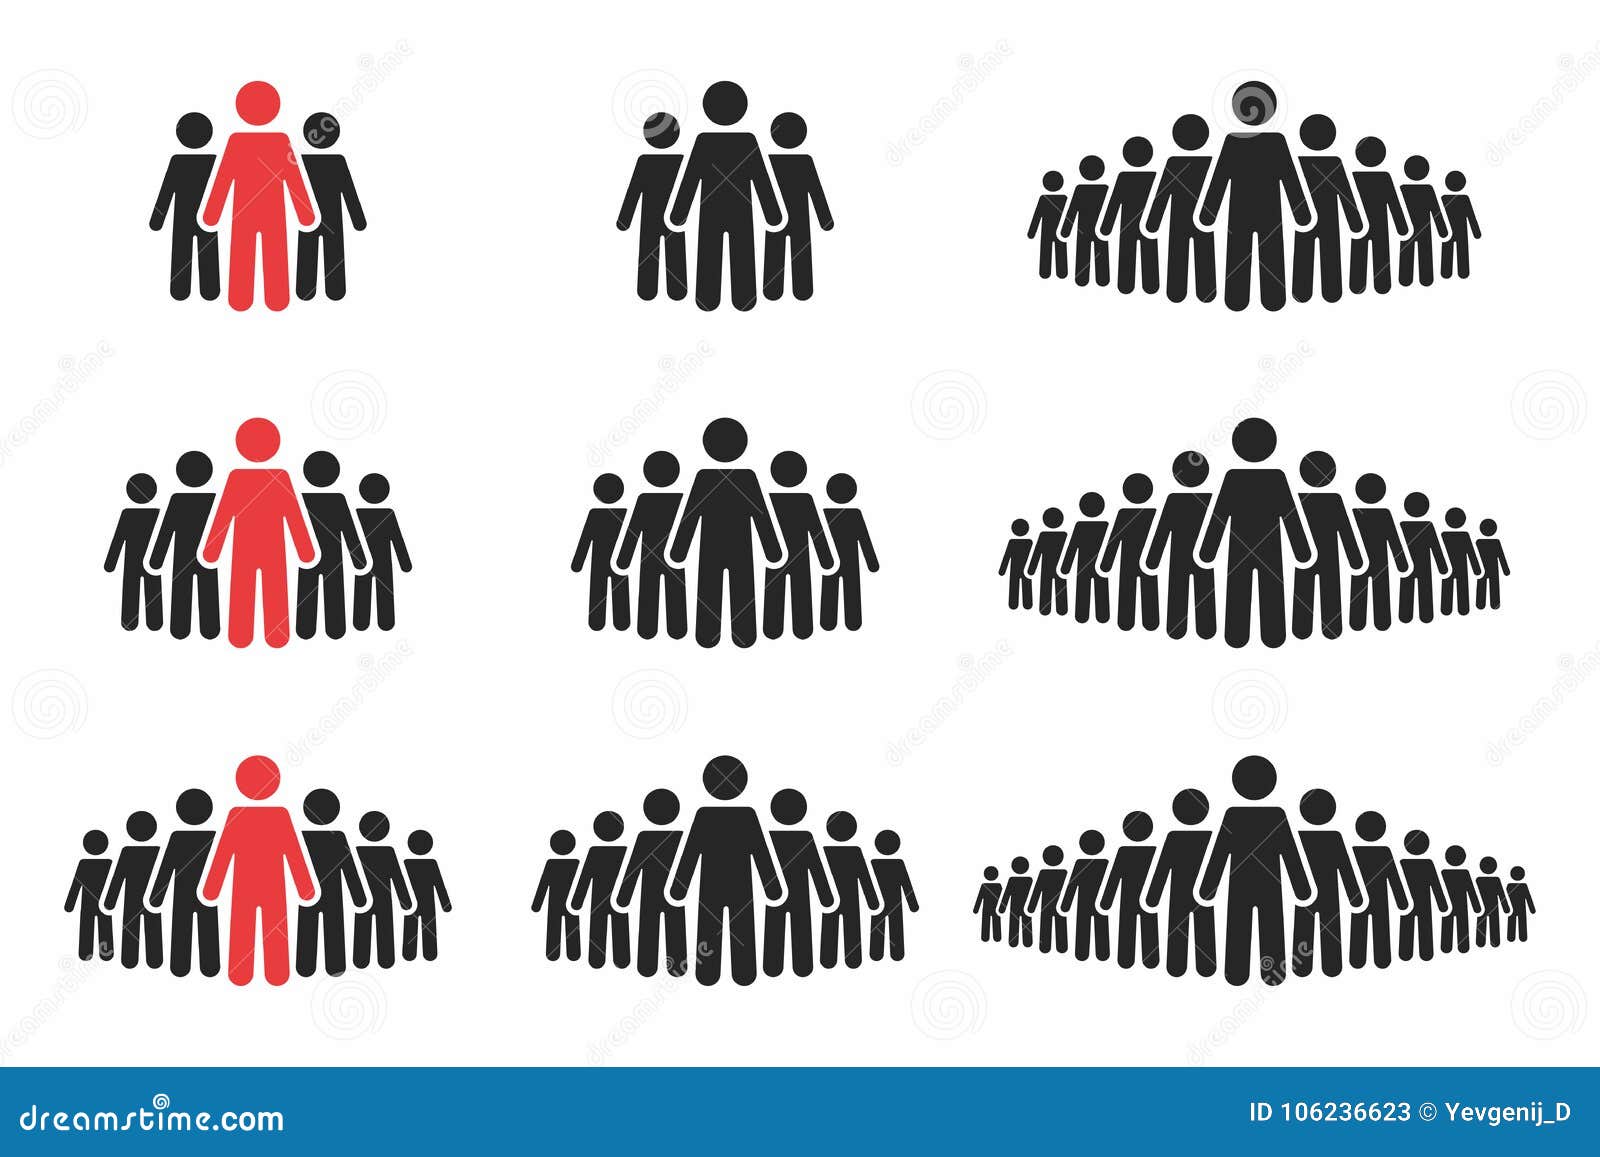 people icon set. crowd of people in black and red colors. group of people in pictogram 